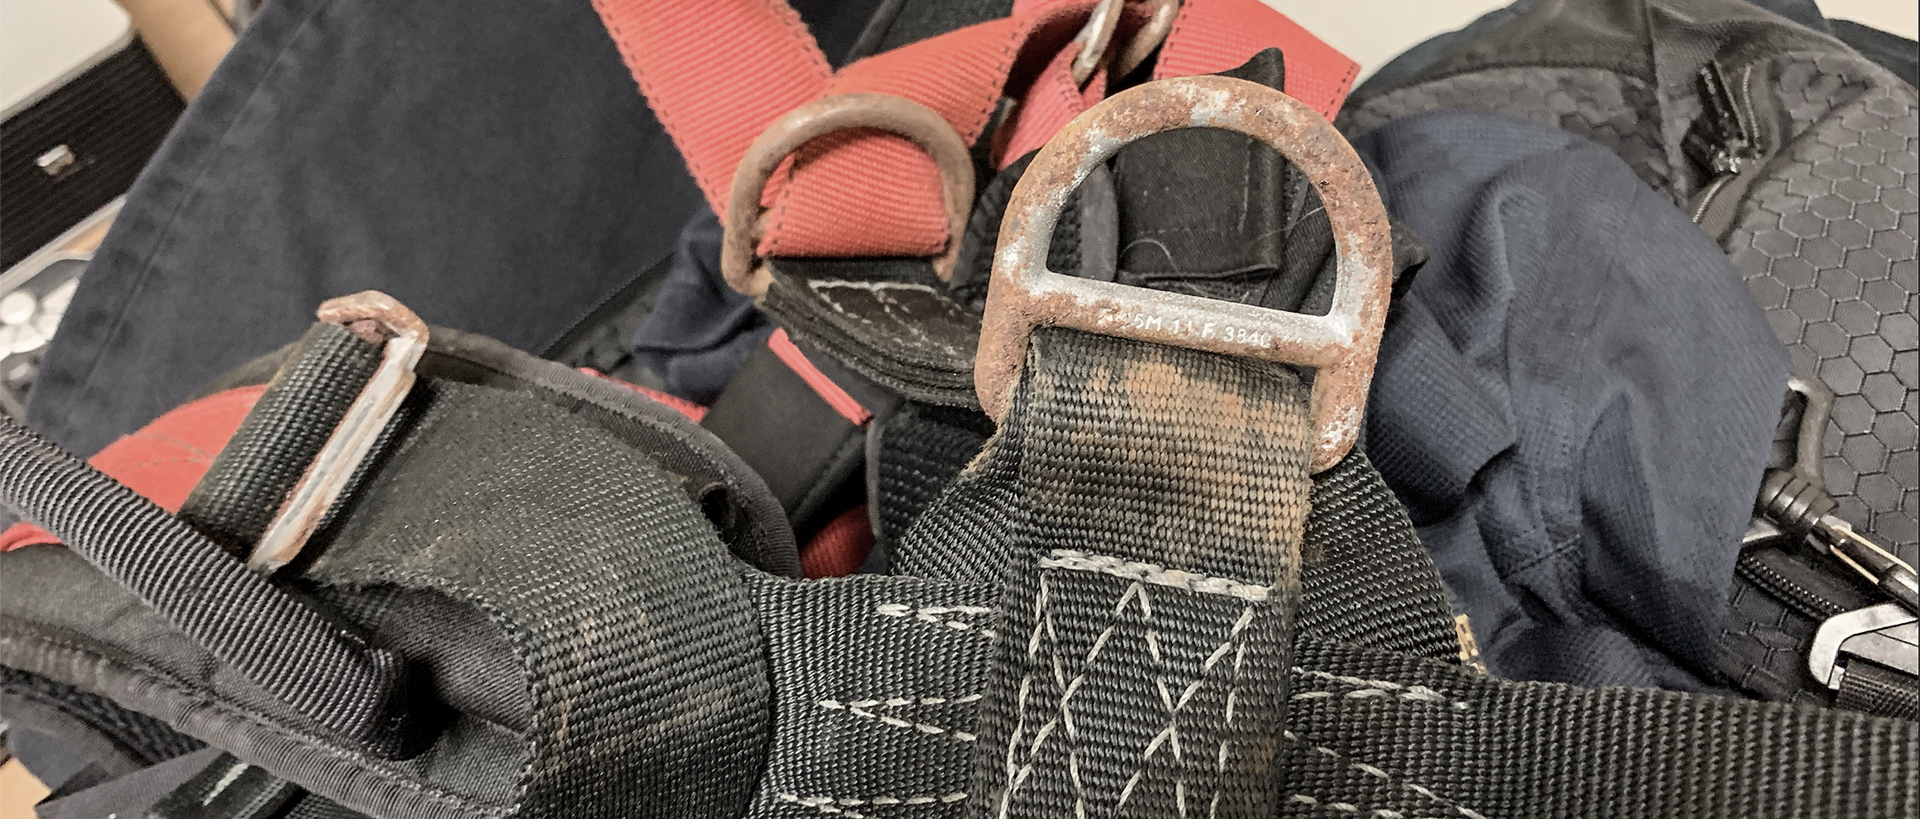 Harness Safety Checks: Inspection Tips and Best Practices